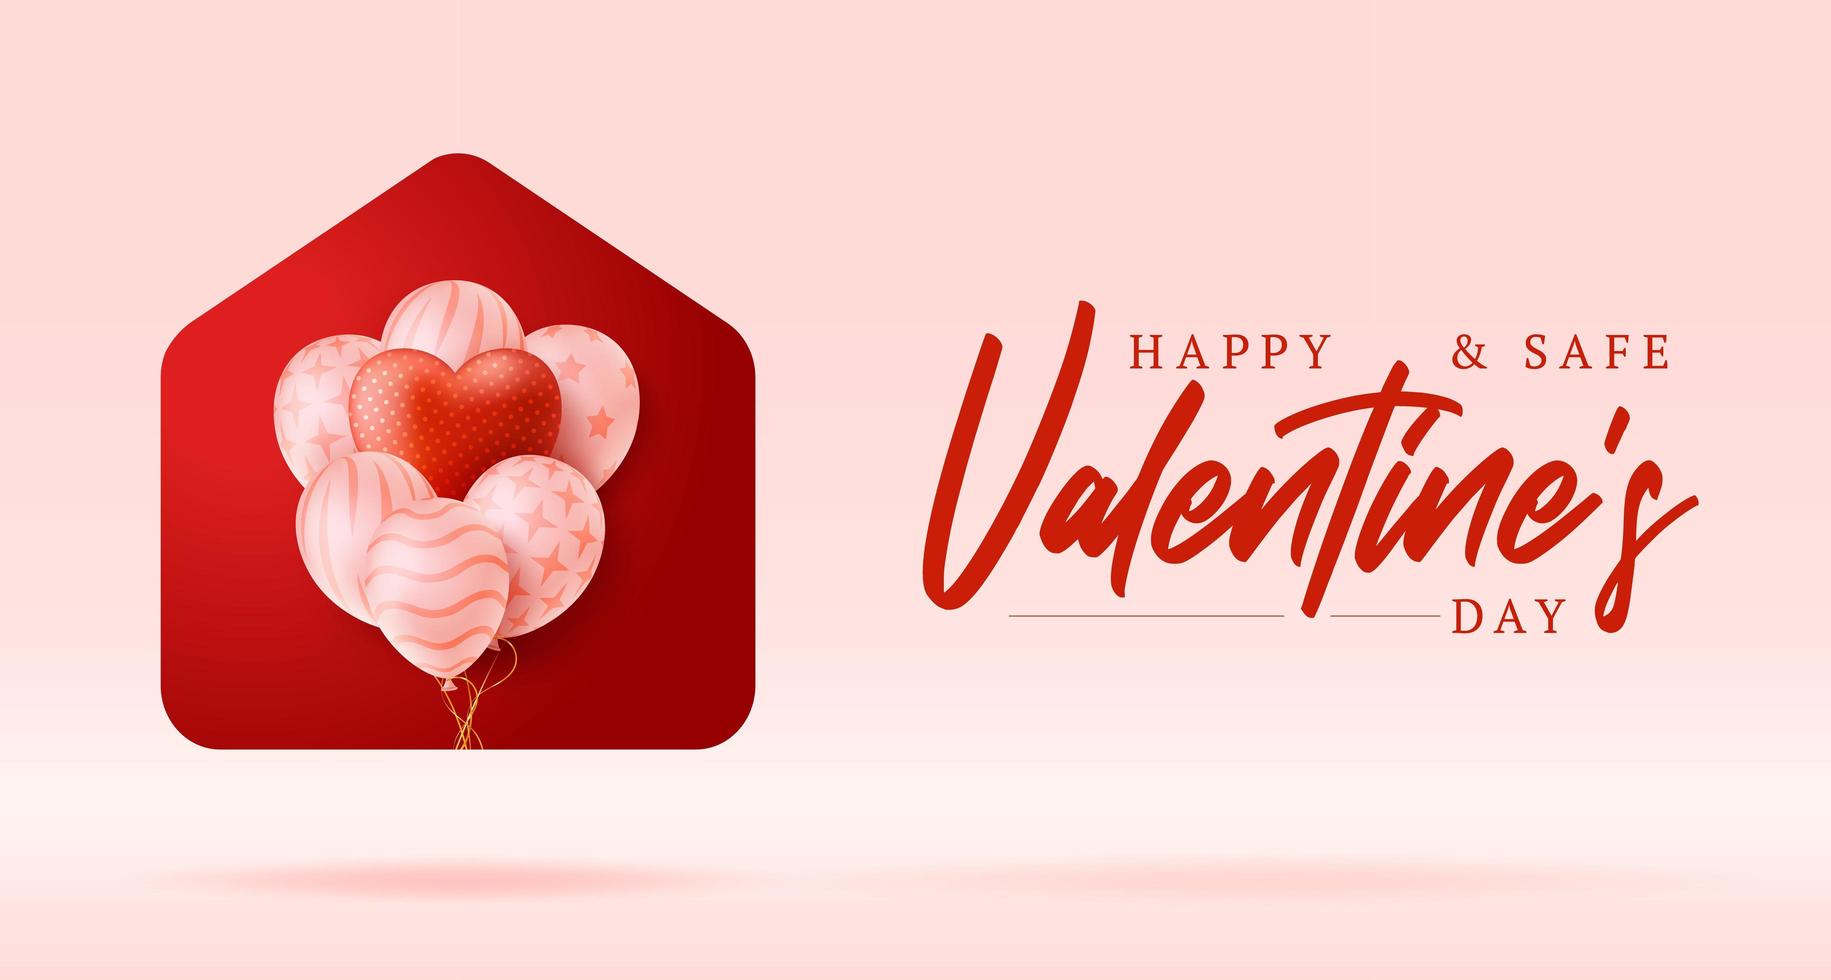 Happy Home Valentine Day Card vector